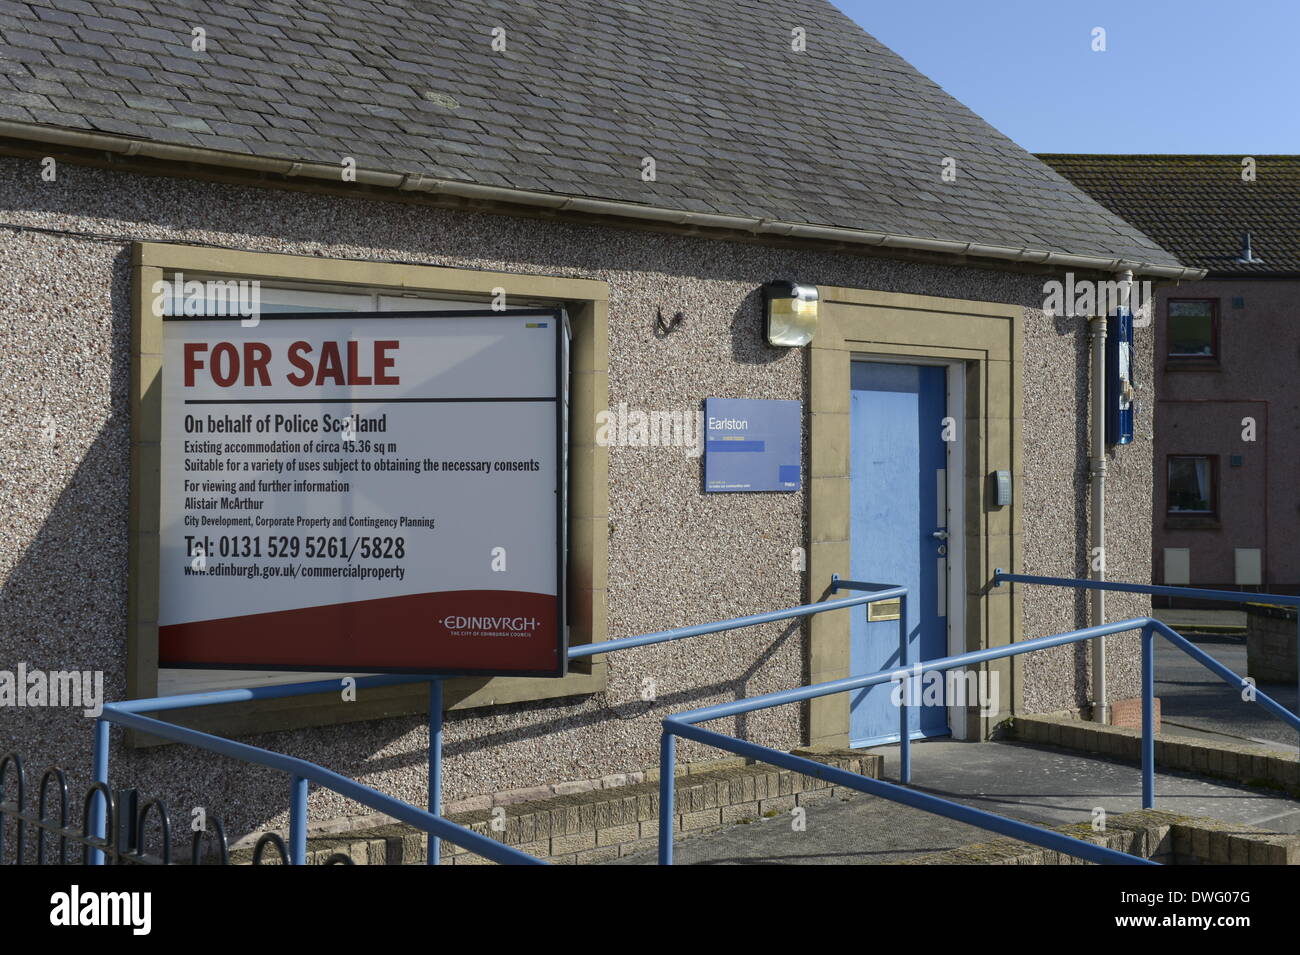 Huntshaw Road, Earlston, UK. 07 Mar 2014. Closed Police offices go on sale Buildings in Earlston goes up for sale on behalf of Police Scotland. Former Police station in Earlston, Scottish Borders. Credit:  Rob Gray/Alamy Live News Stock Photo